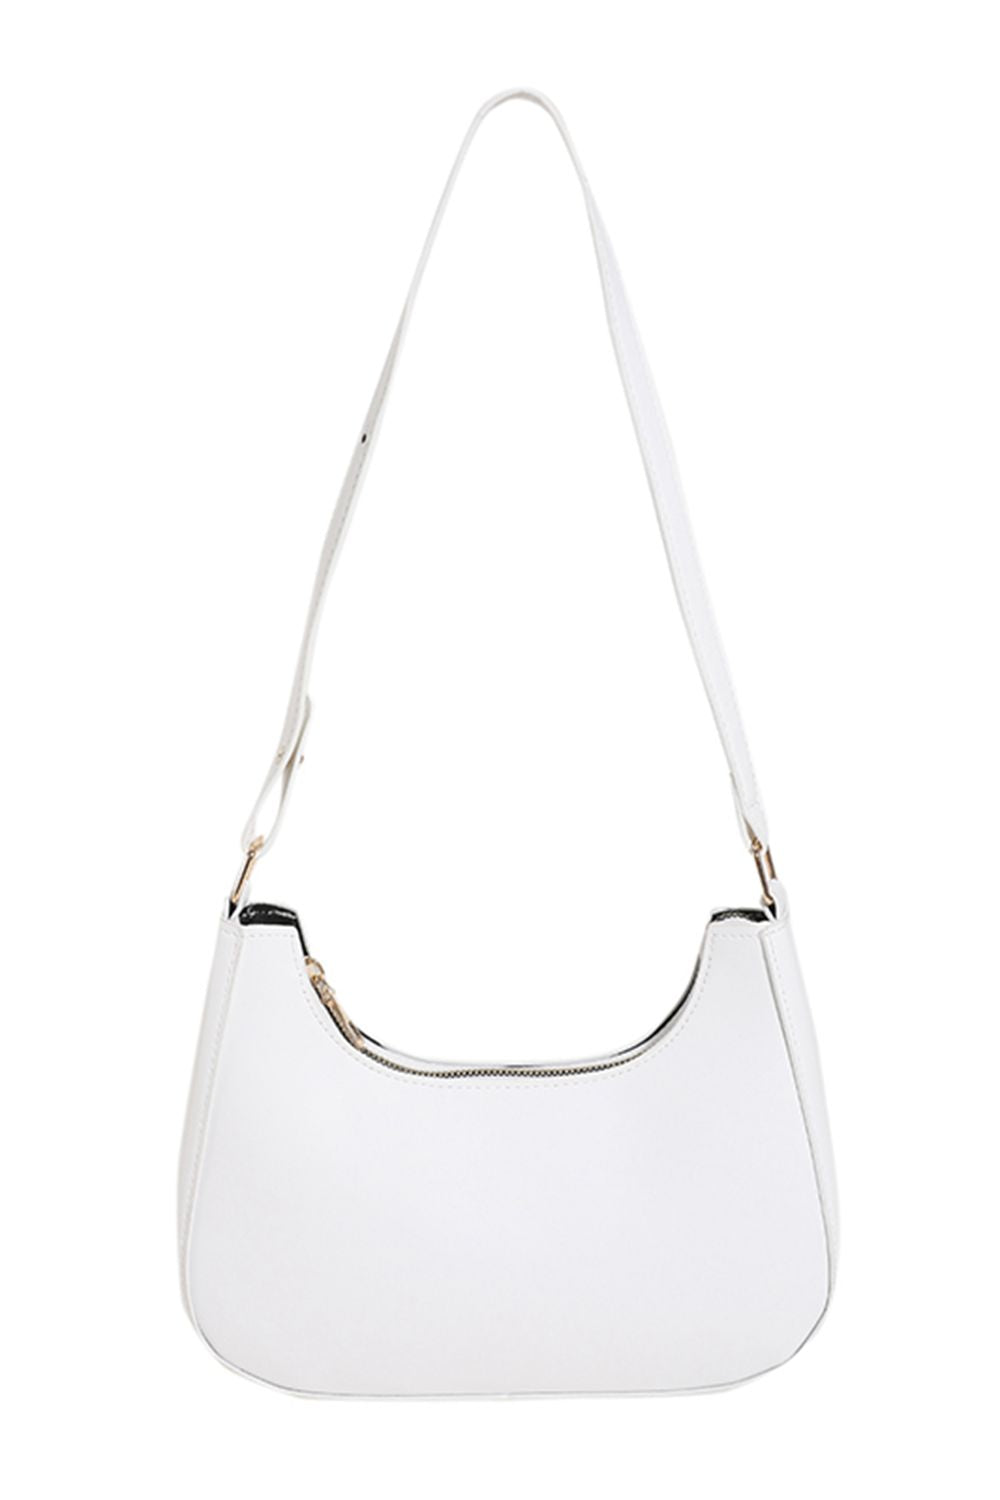 PU Leather Shoulder Bag White One Size